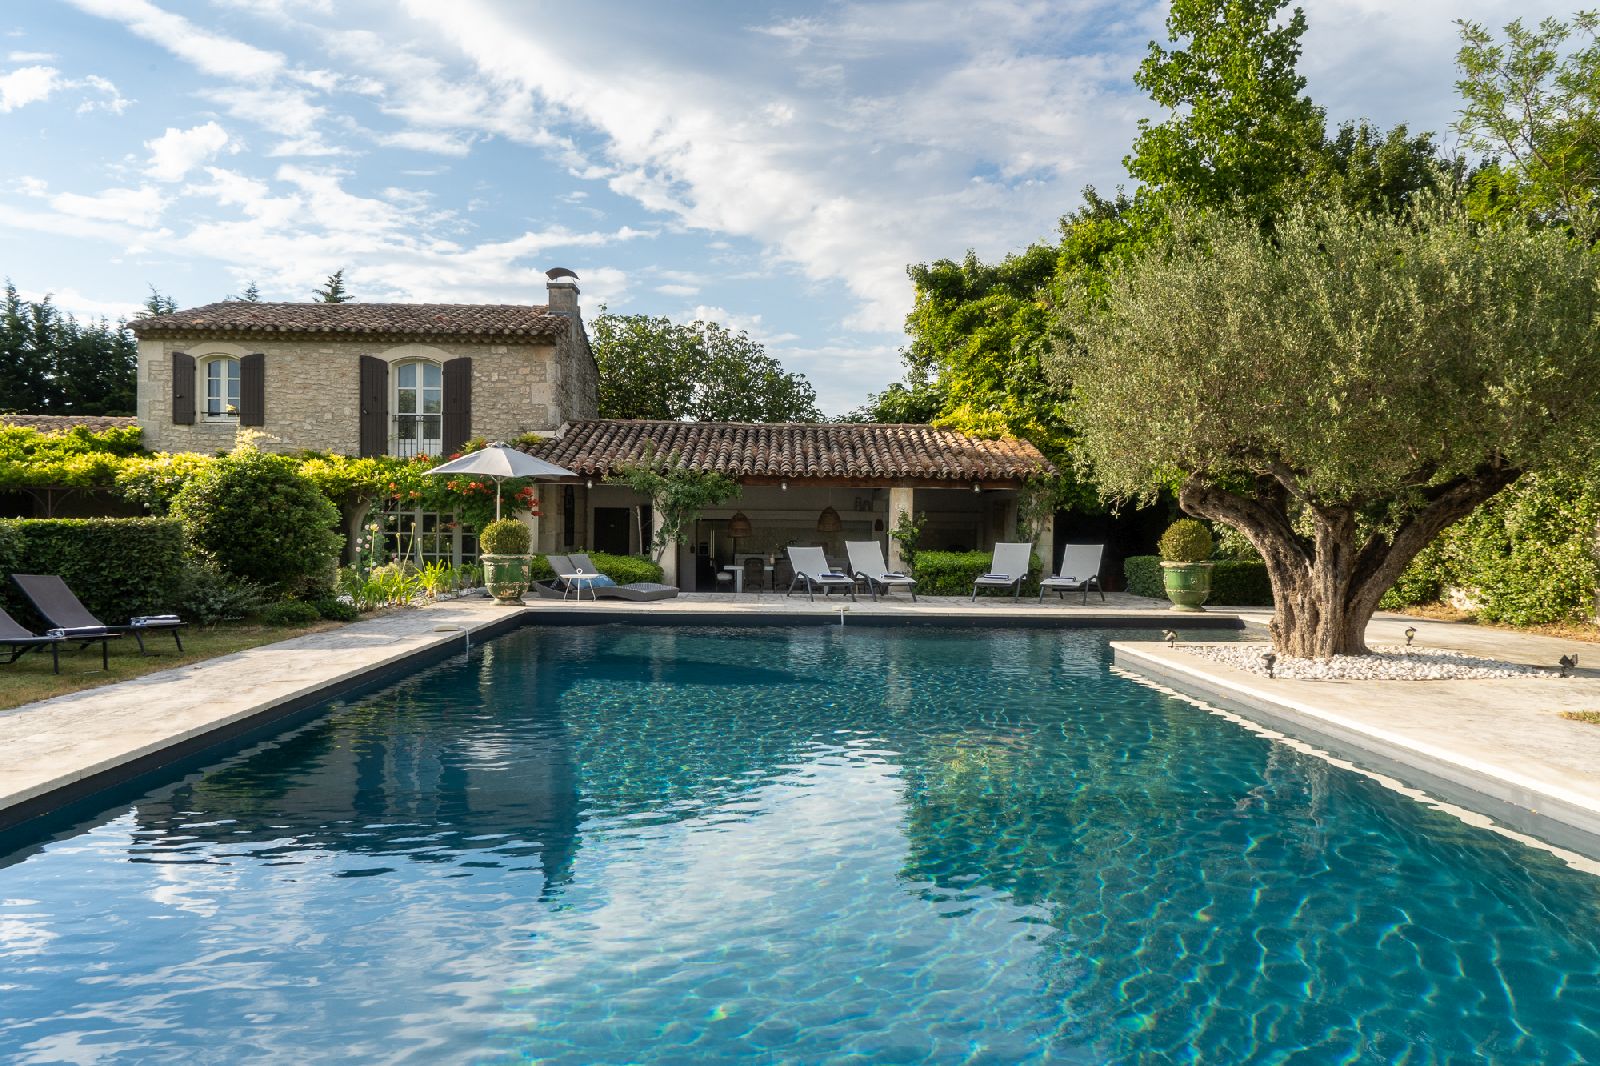 Pool with villa in the background at La Colombe in Provence